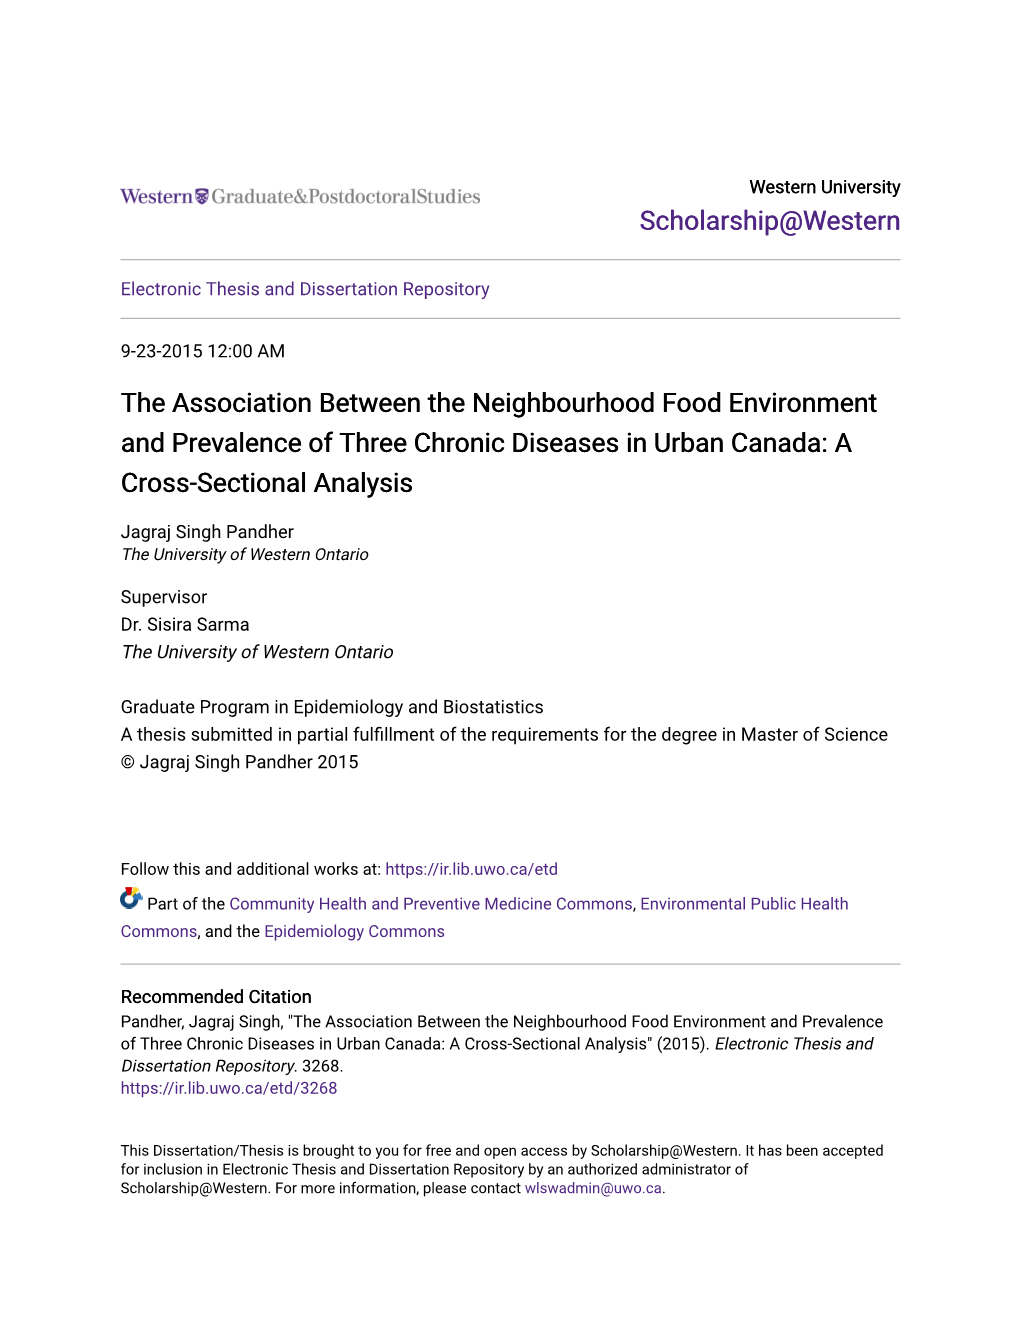 The Association Between the Neighbourhood Food Environment and Prevalence of Three Chronic Diseases in Urban Canada: a Cross-Sectional Analysis